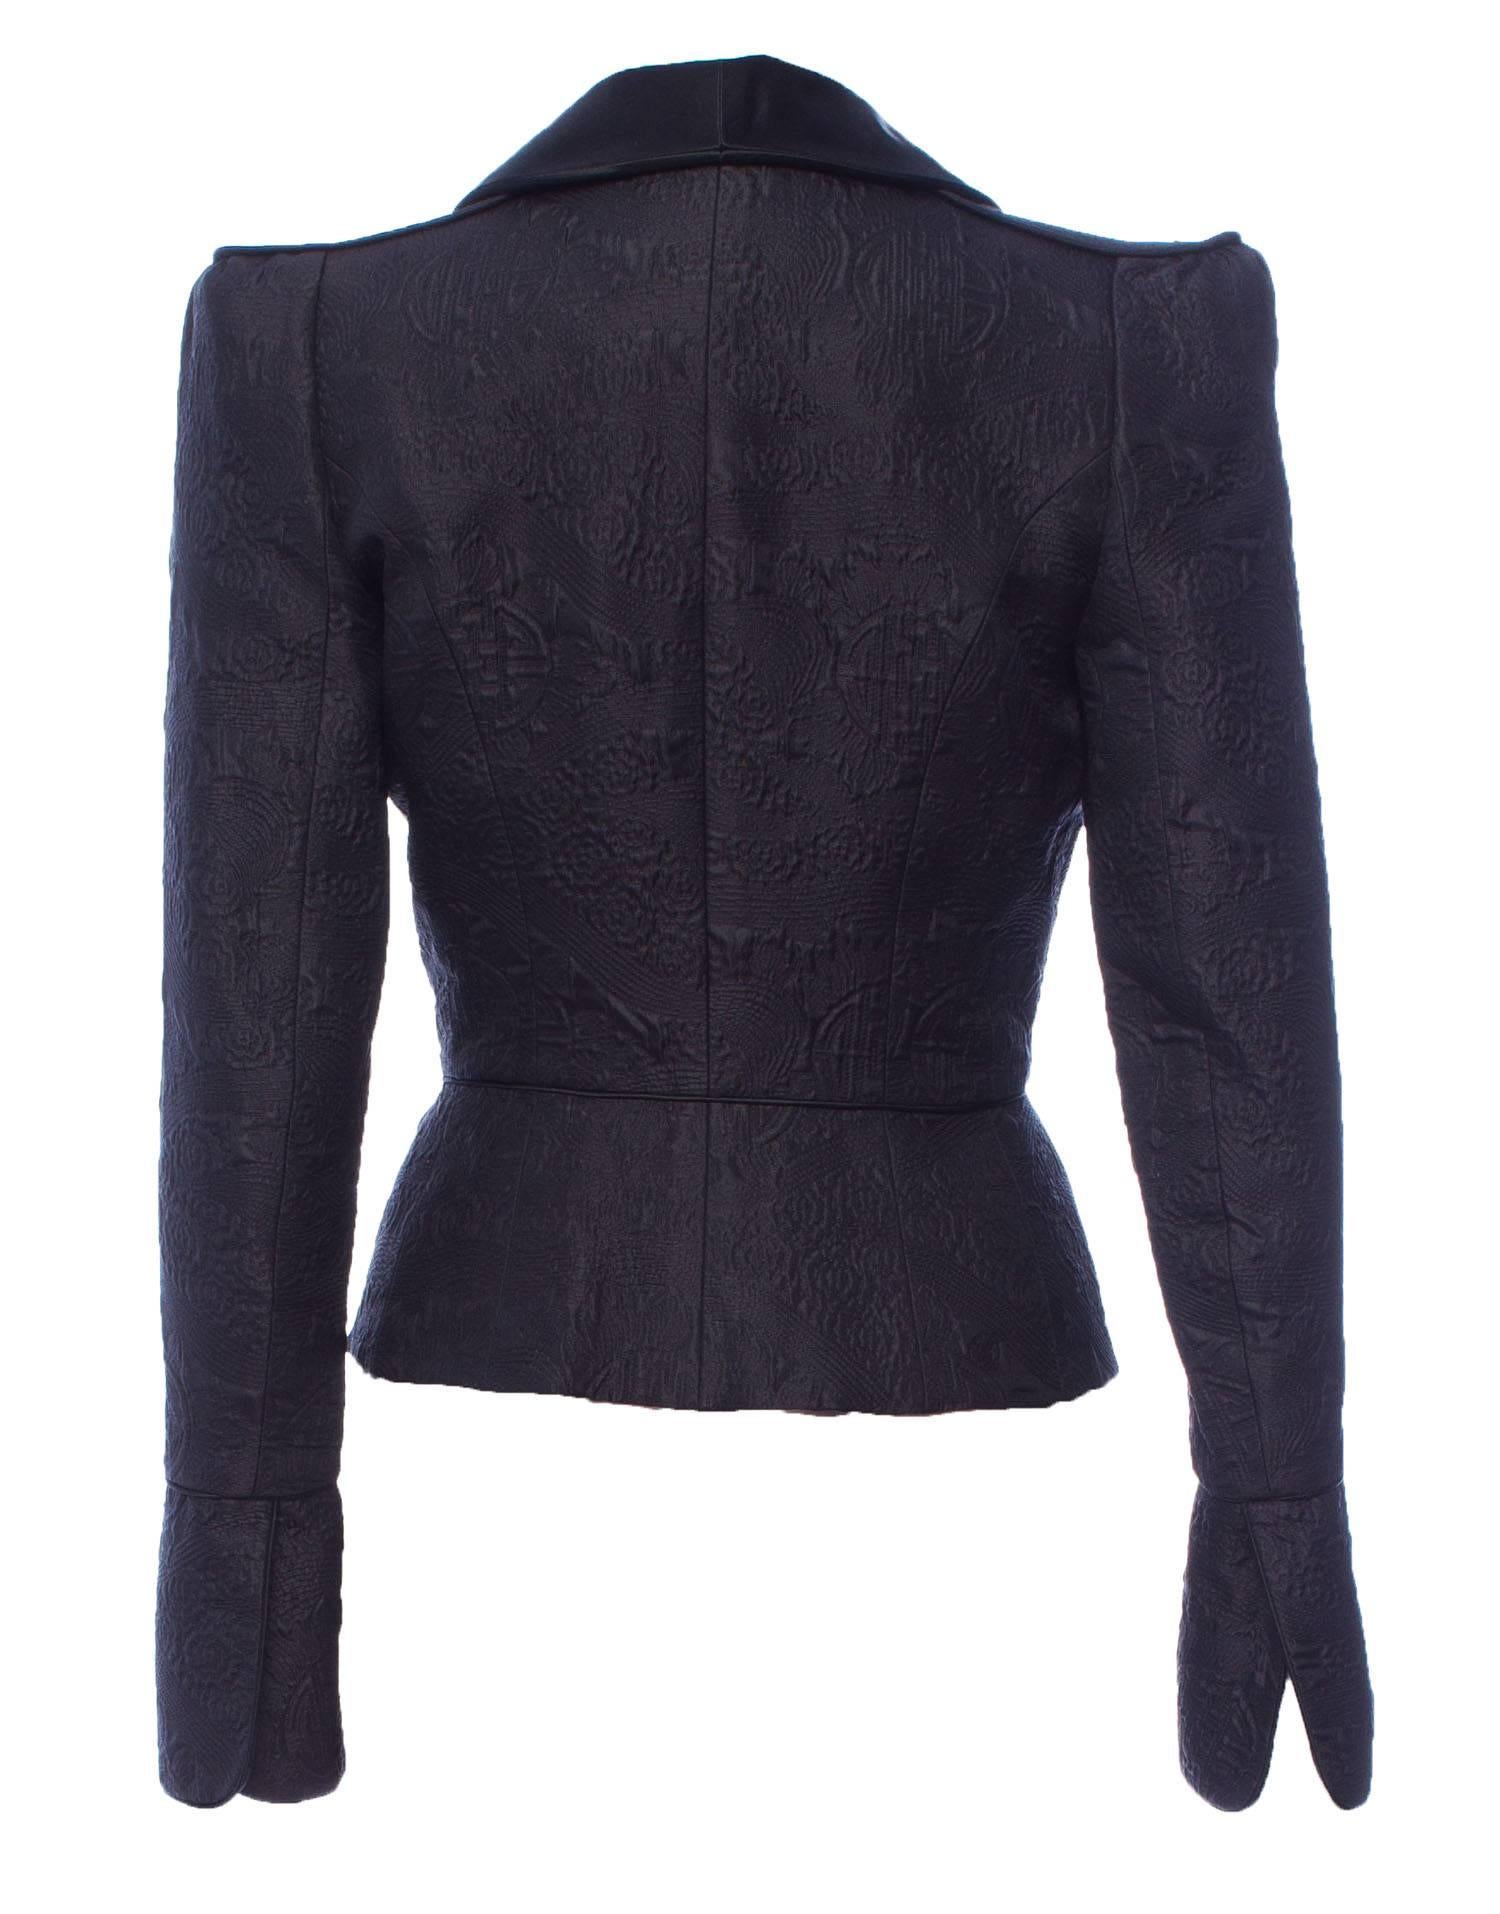  Tom Ford for Yves Saint Laurent F/W 2004 Chinoiserie Tuxedo Jacket Fr.42  US 10 In Excellent Condition For Sale In Montgomery, TX